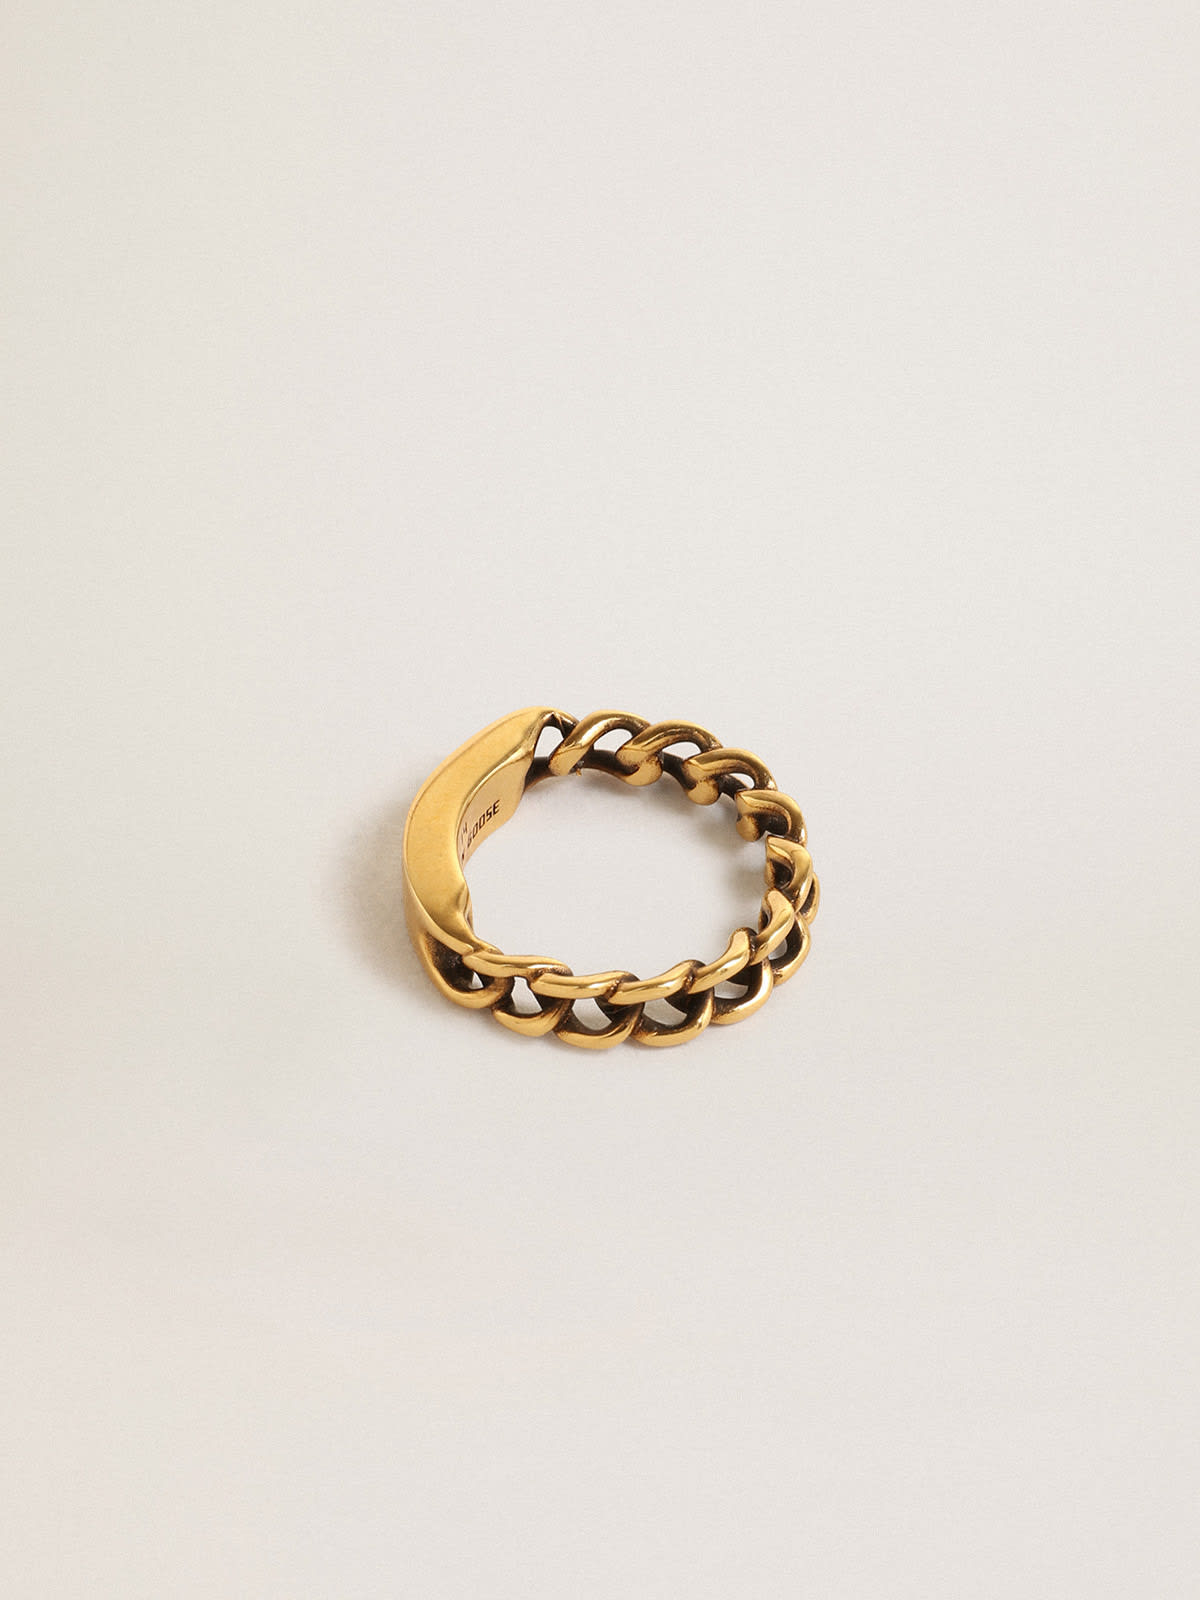 Golden Goose - Ring in antique gold color with regular links in 